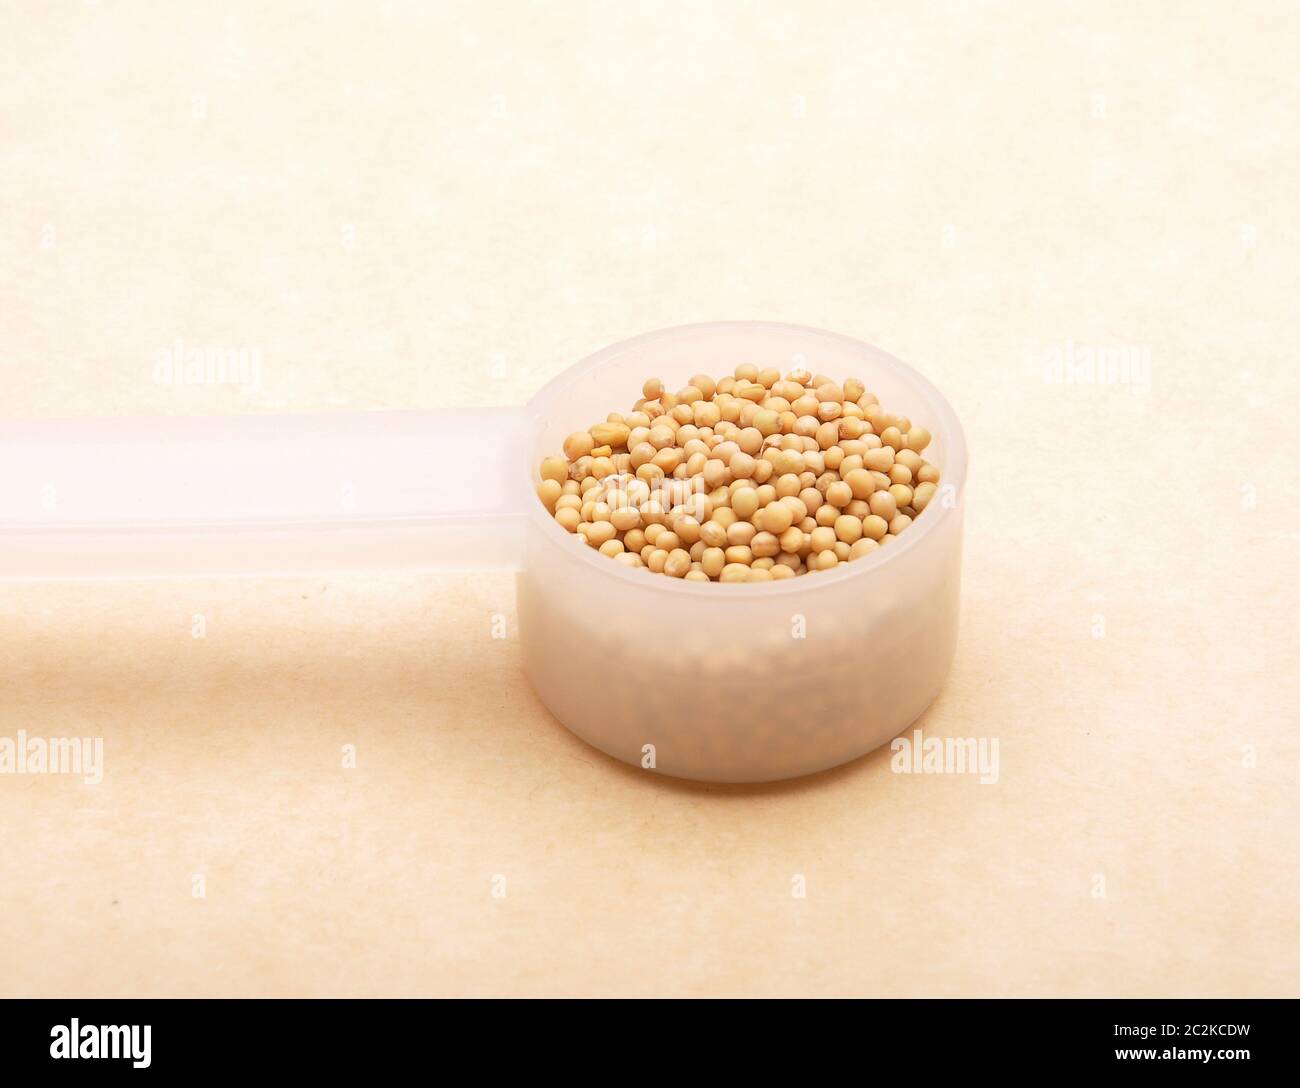 Mustard seeds in measuring spoon on brown background Stock Photo